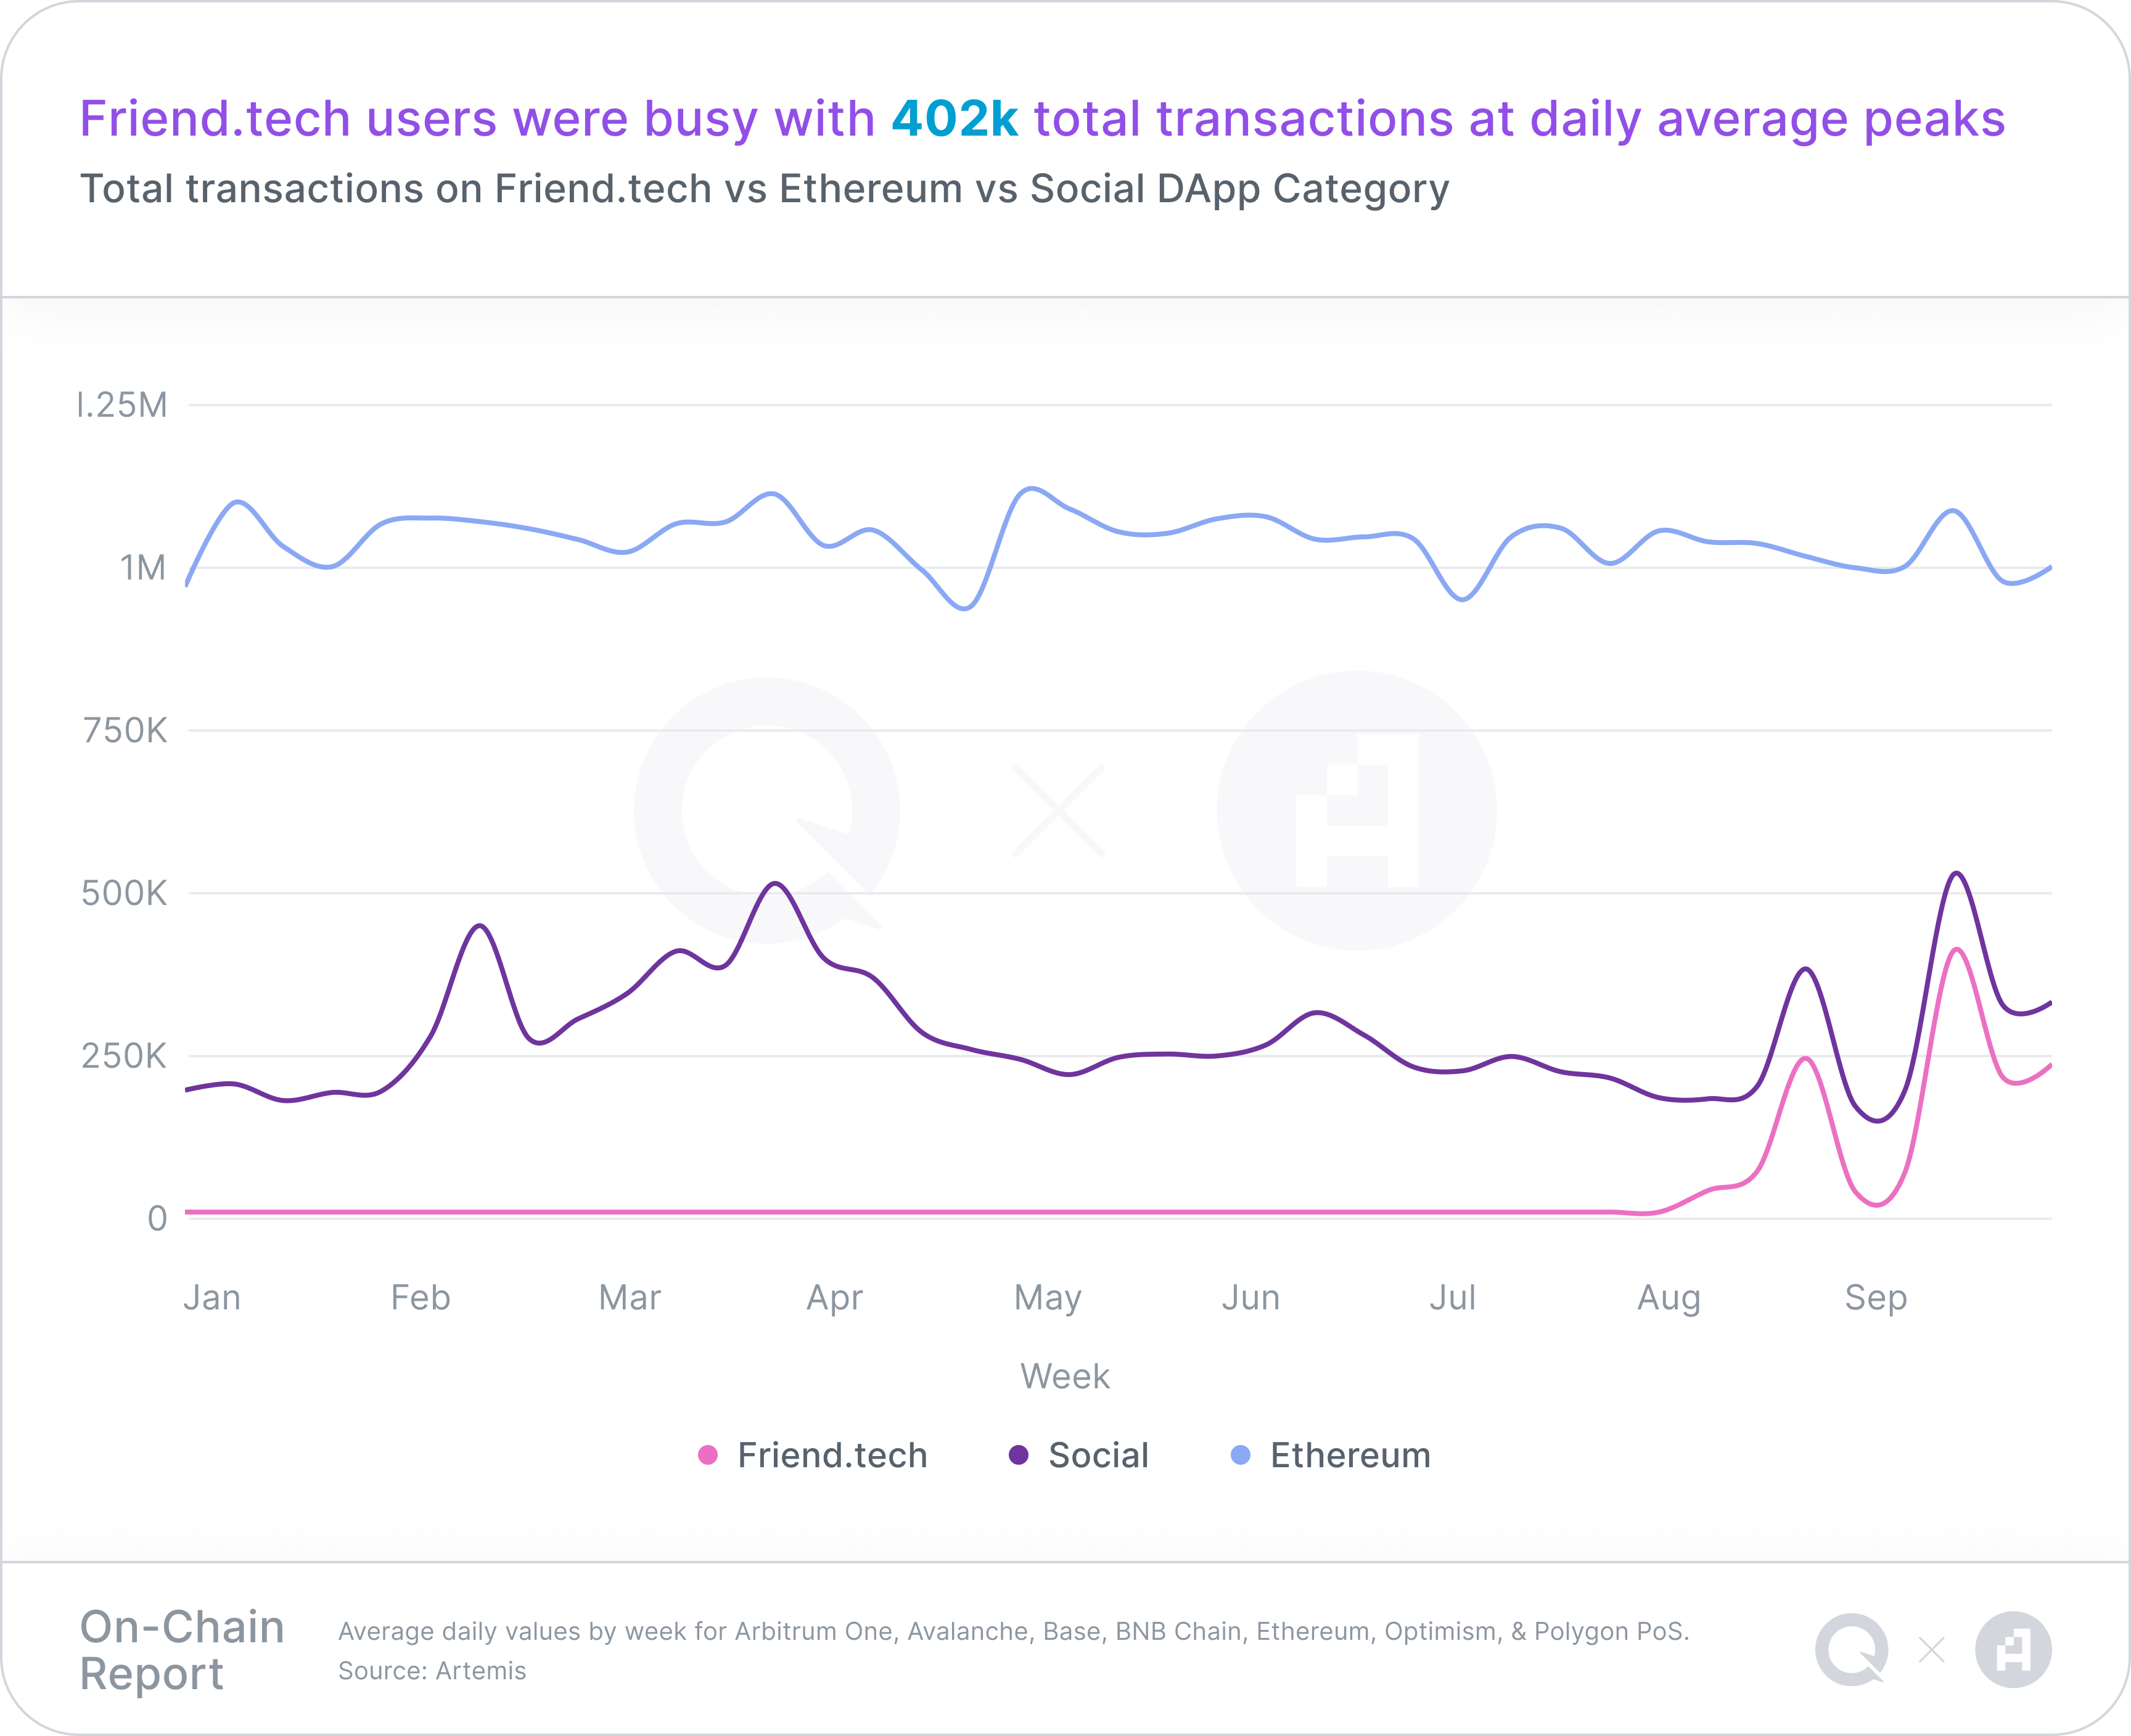 A chart representing Total transactions on Friend.tech vs Ethereum vs Social DApp Category, with a takeaway headline of "Friend.tech users were busy with 402k total transactions at daily average peaks"